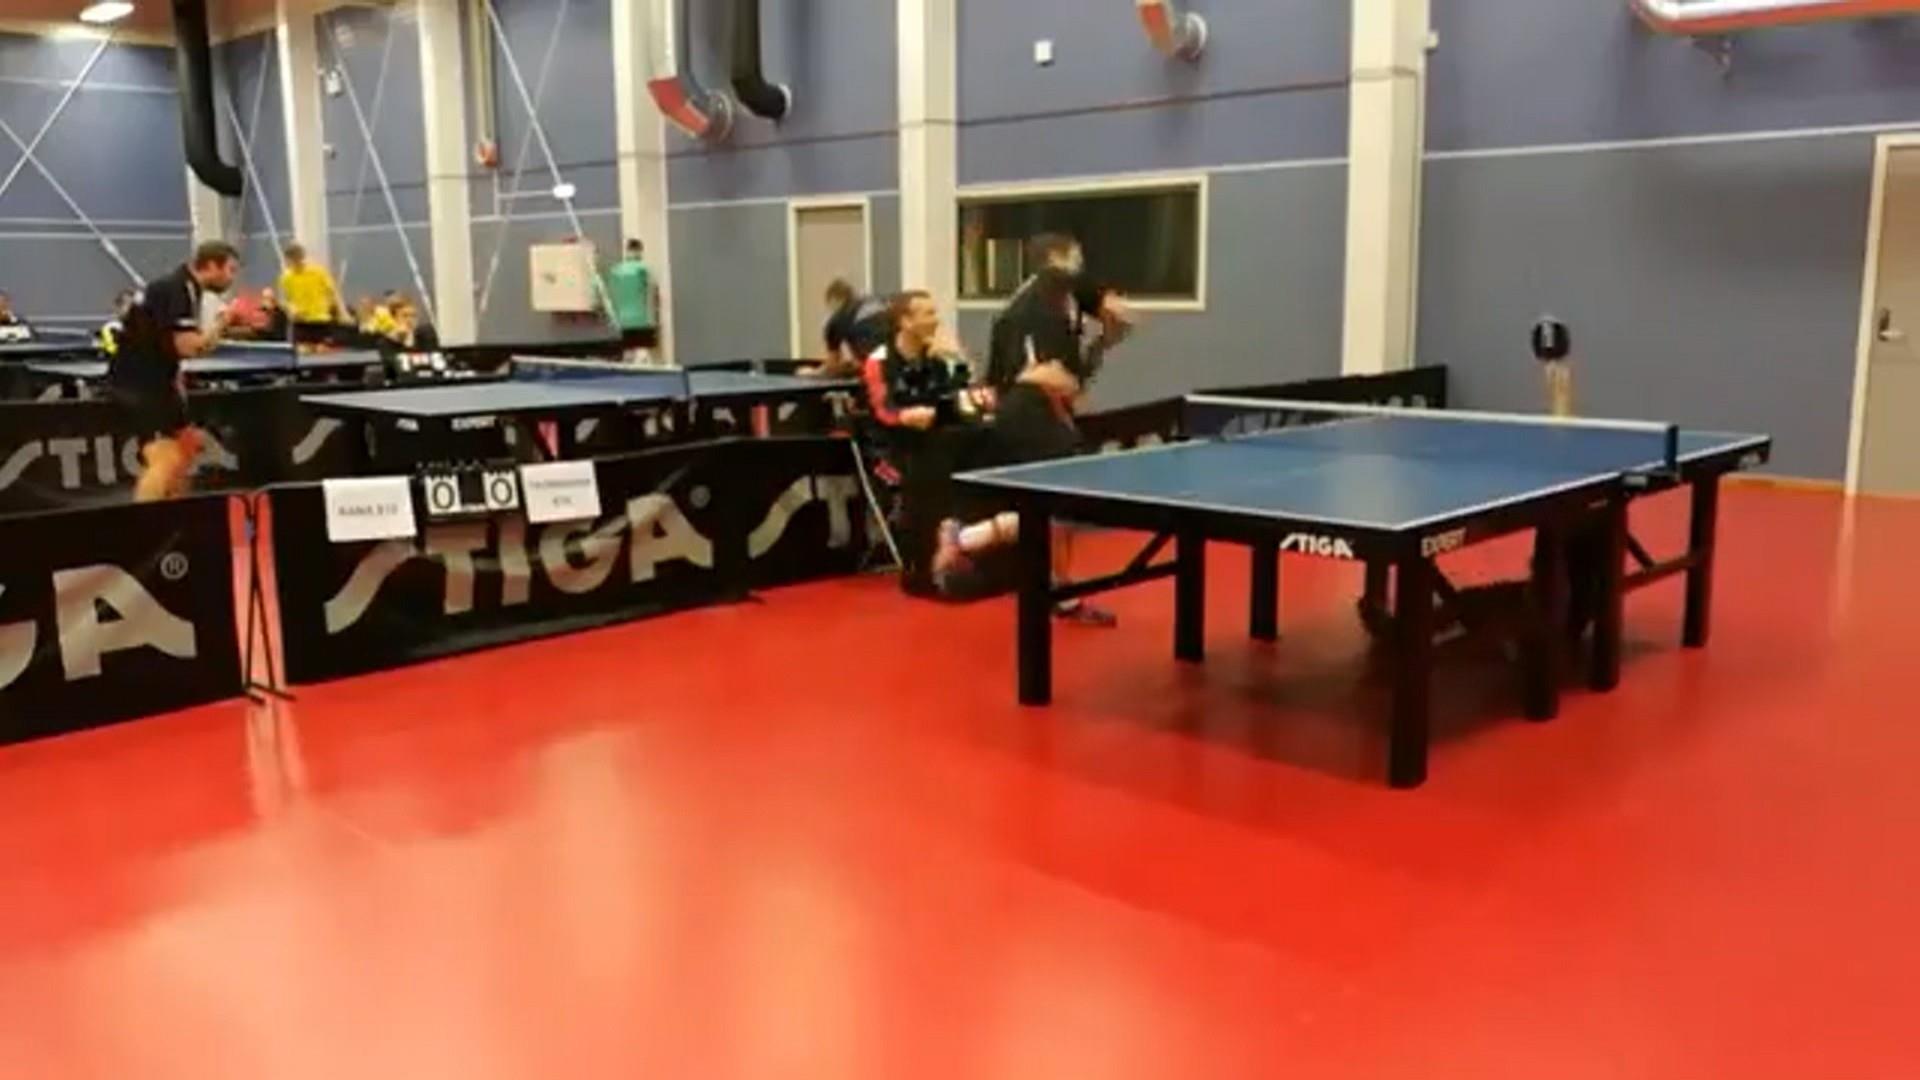 Table tennis player strikes bowling pins with ping-pong balls